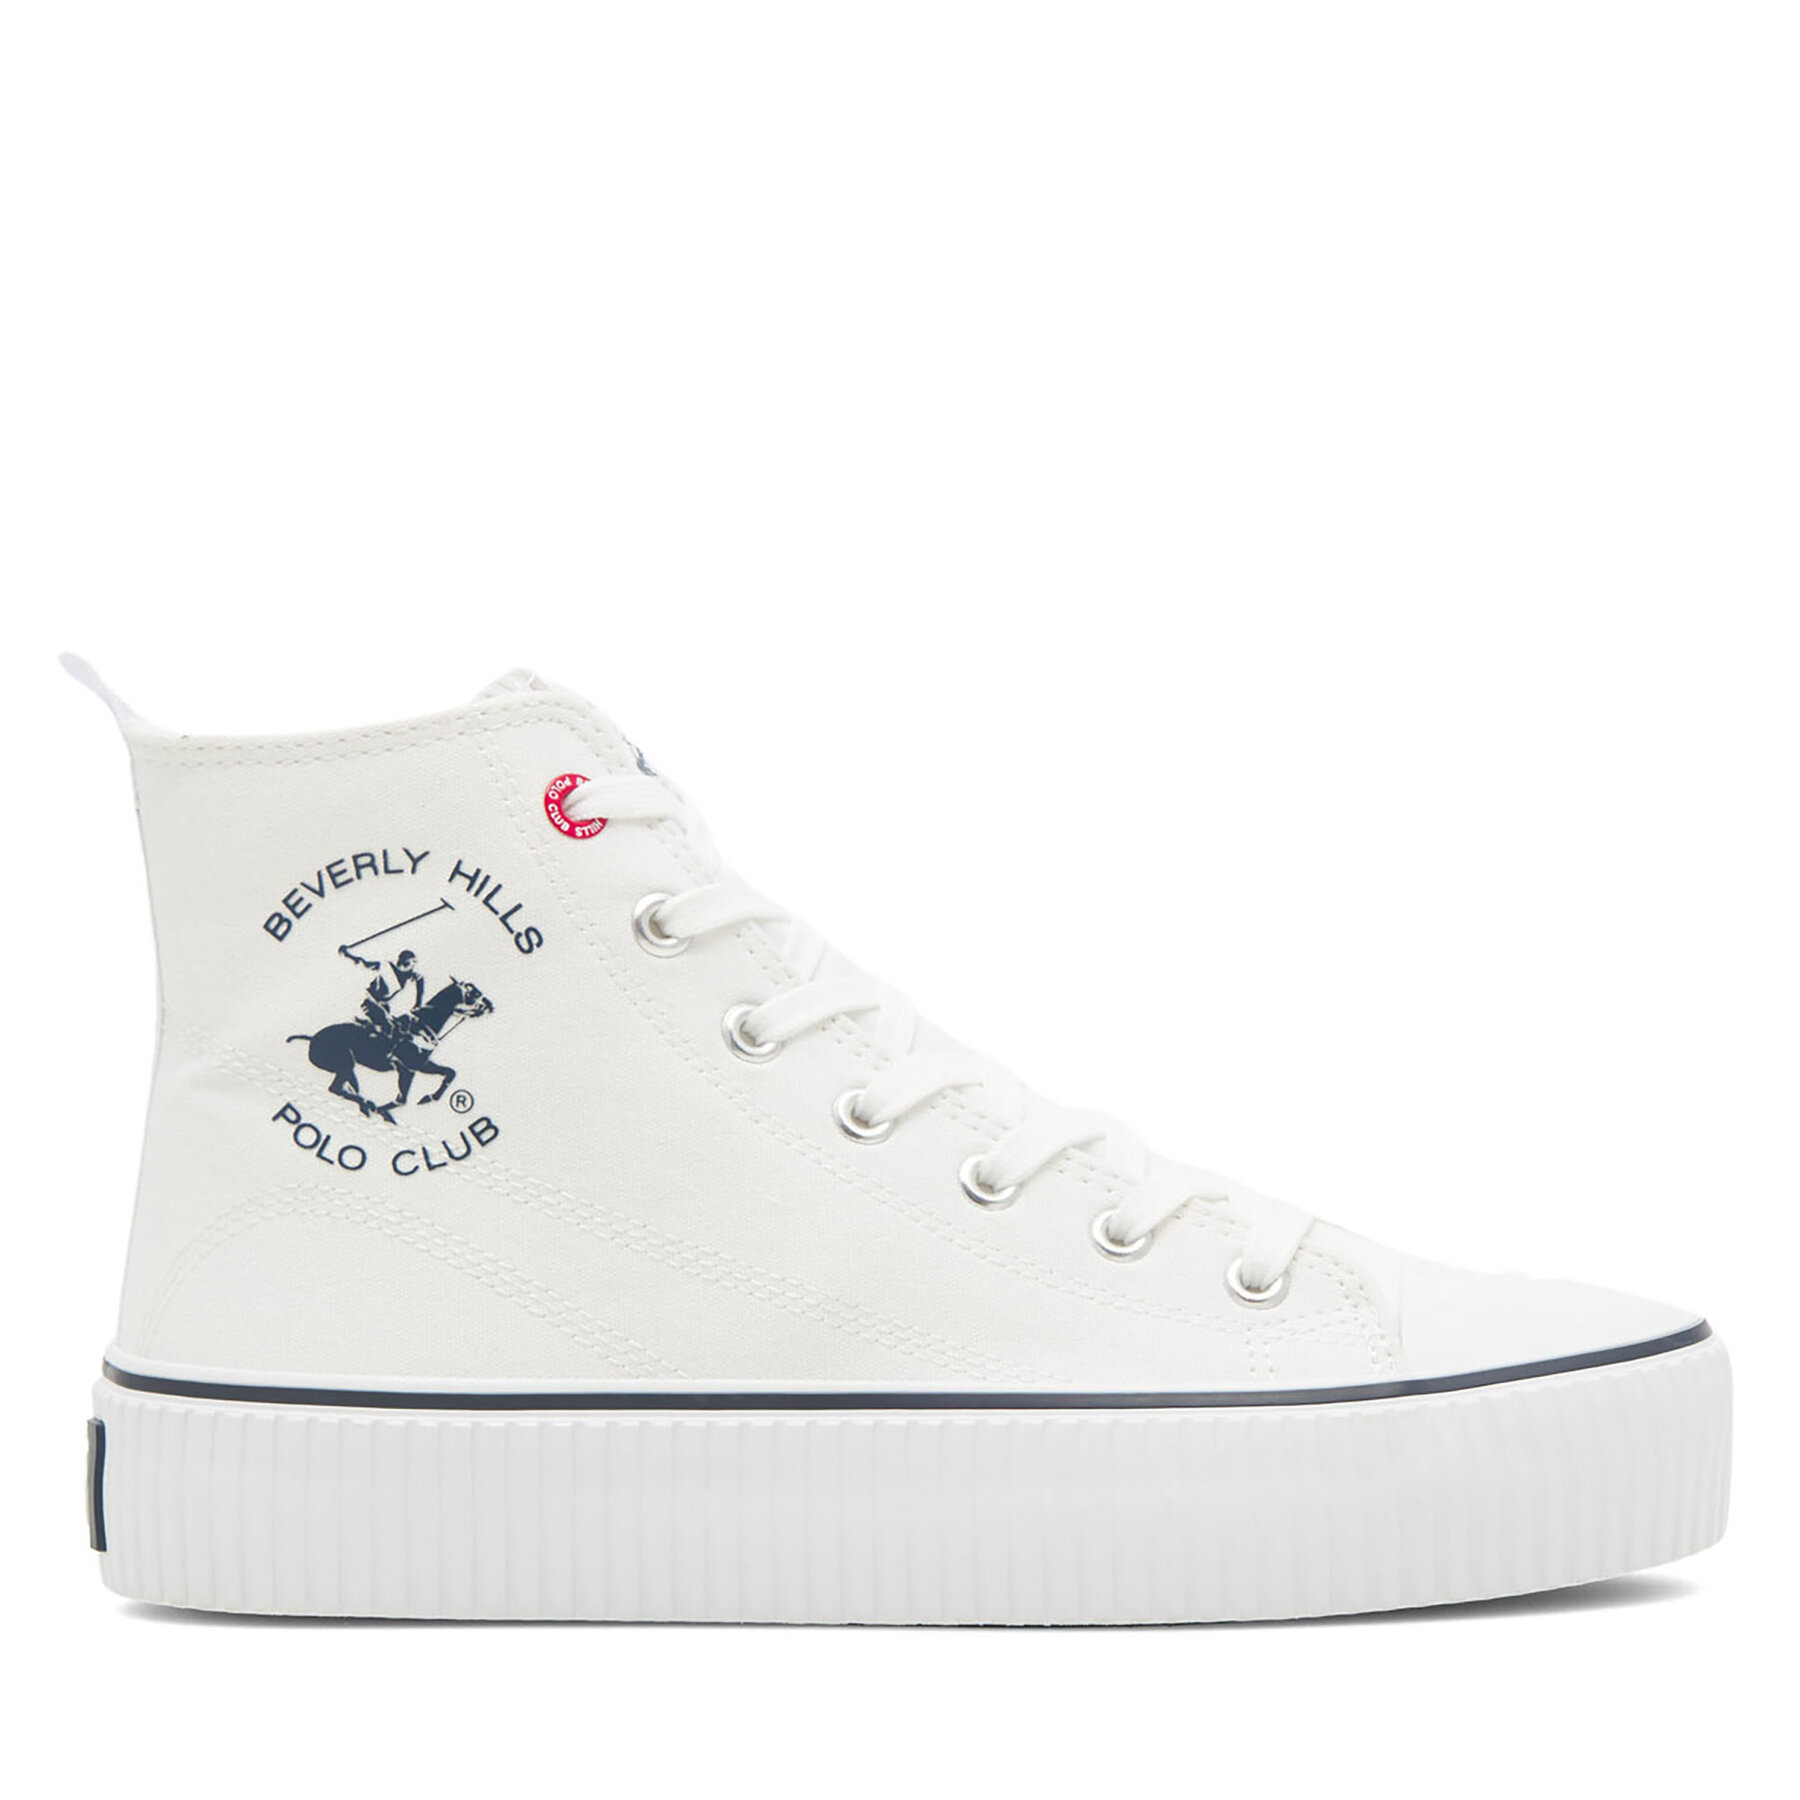 Sneakers aus Stoff Beverly Hills Polo Club BHPC026M Weiß von Beverly Hills Polo Club